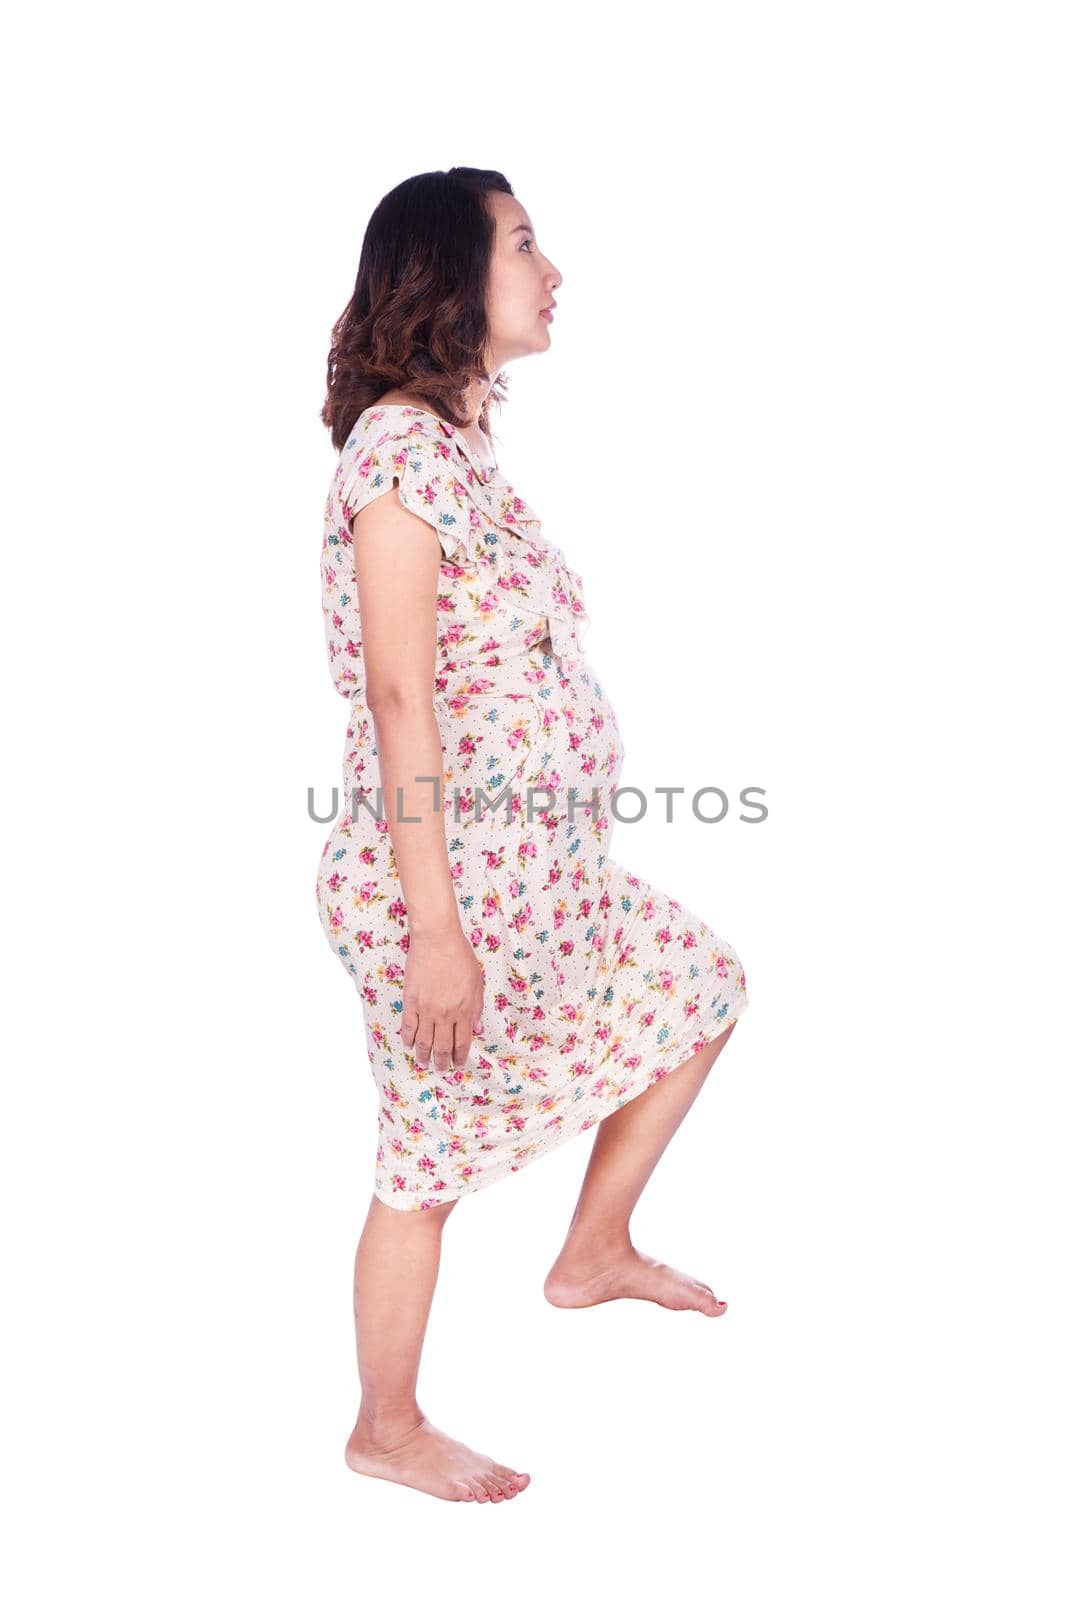 pregnant woman stepping on imaginary step isolted on white by geargodz